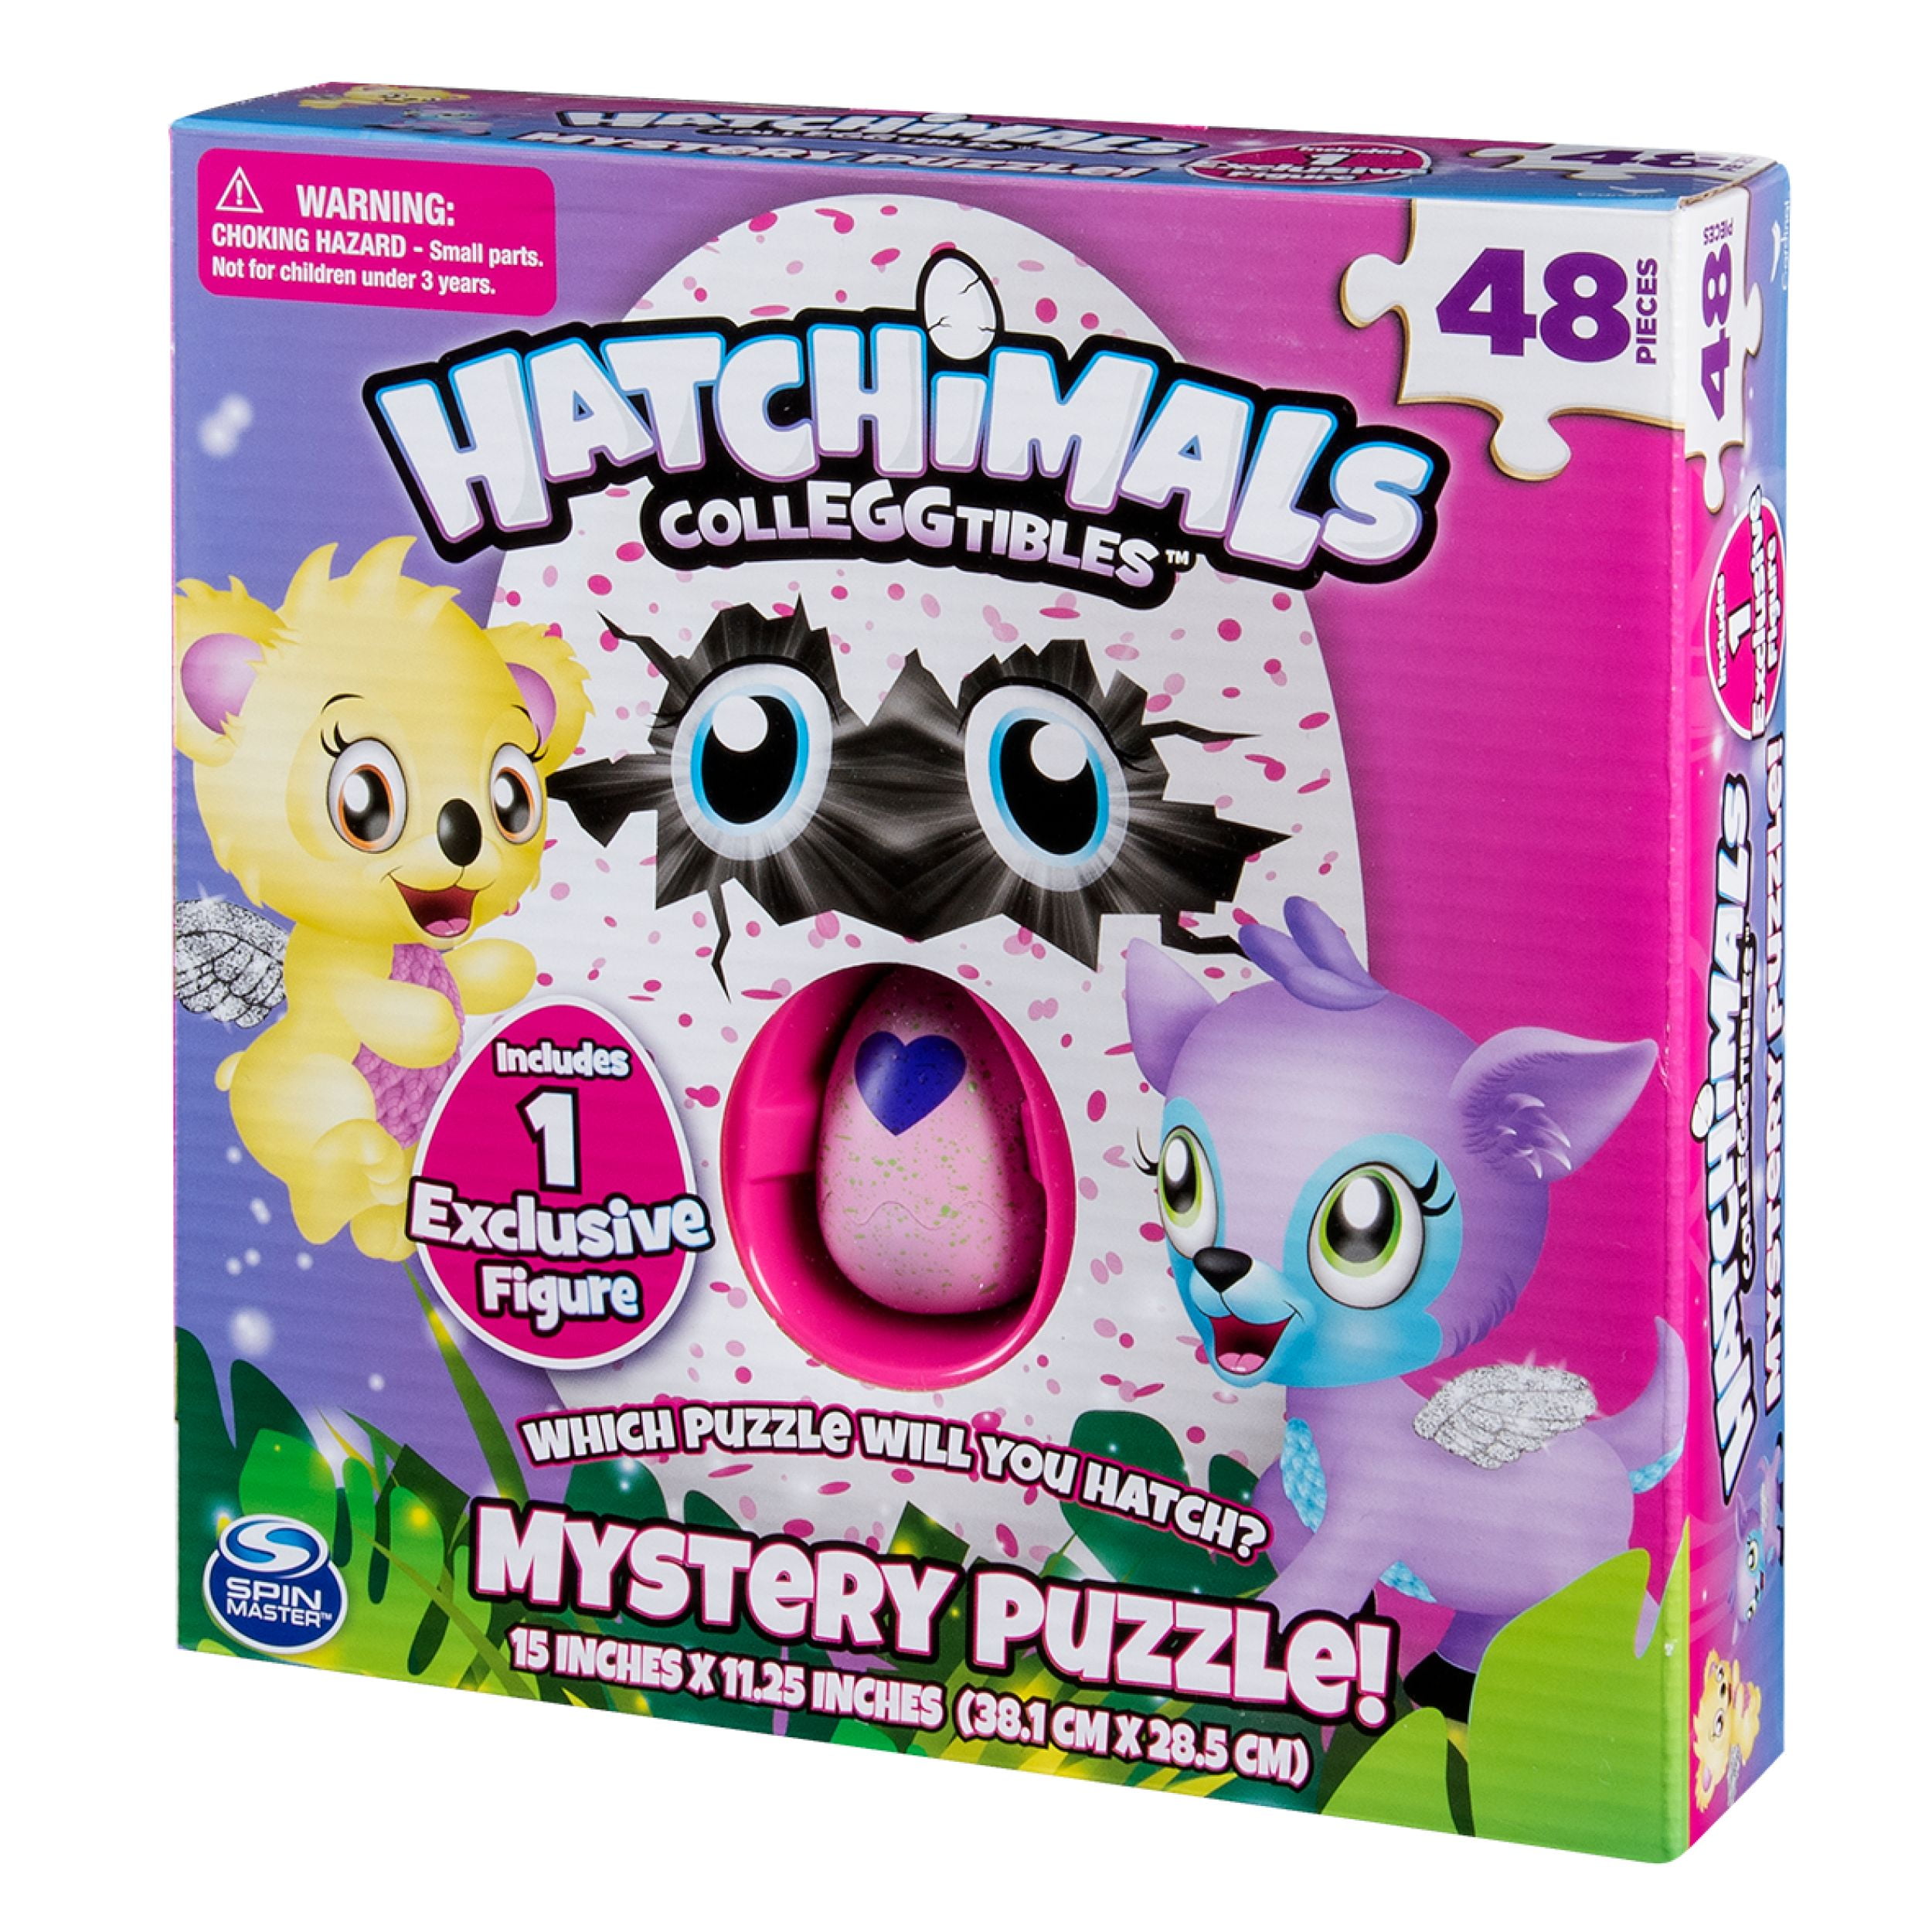 Hatchimals Mystery Puzzle 48 Piece Puzzle and CollEGGtibles Figure 